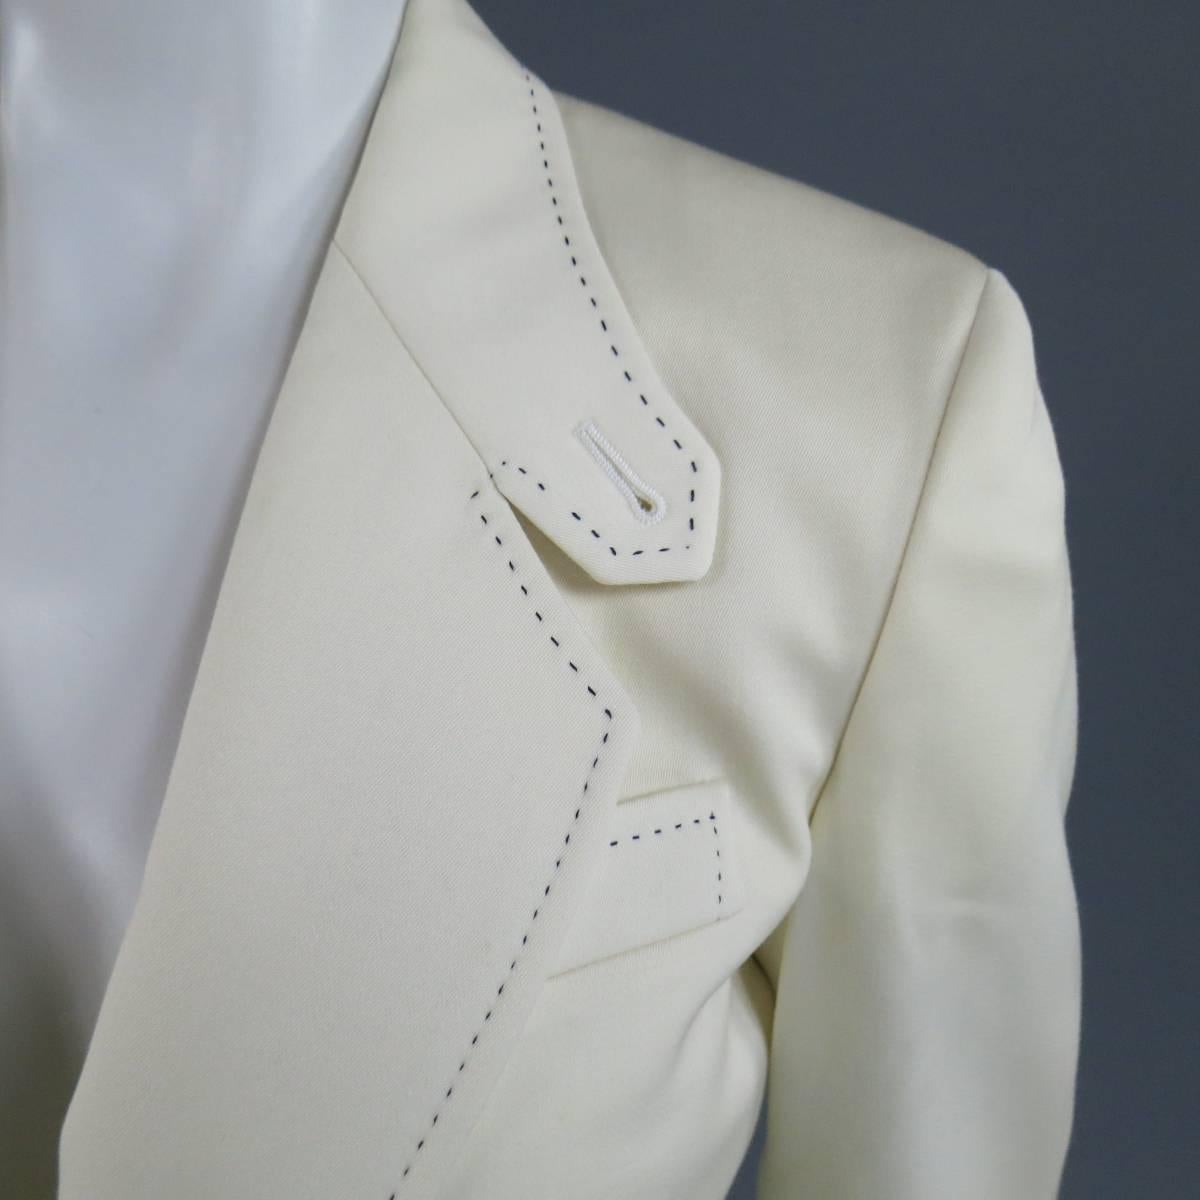 This chic CHLOE riding jacket comes in a rich cream wool twill and features a classic notch lapel with button tab, double slanted single button closure, and black contrast stitching throughout. Faint mark shown in detail shot. Made in Italy.
